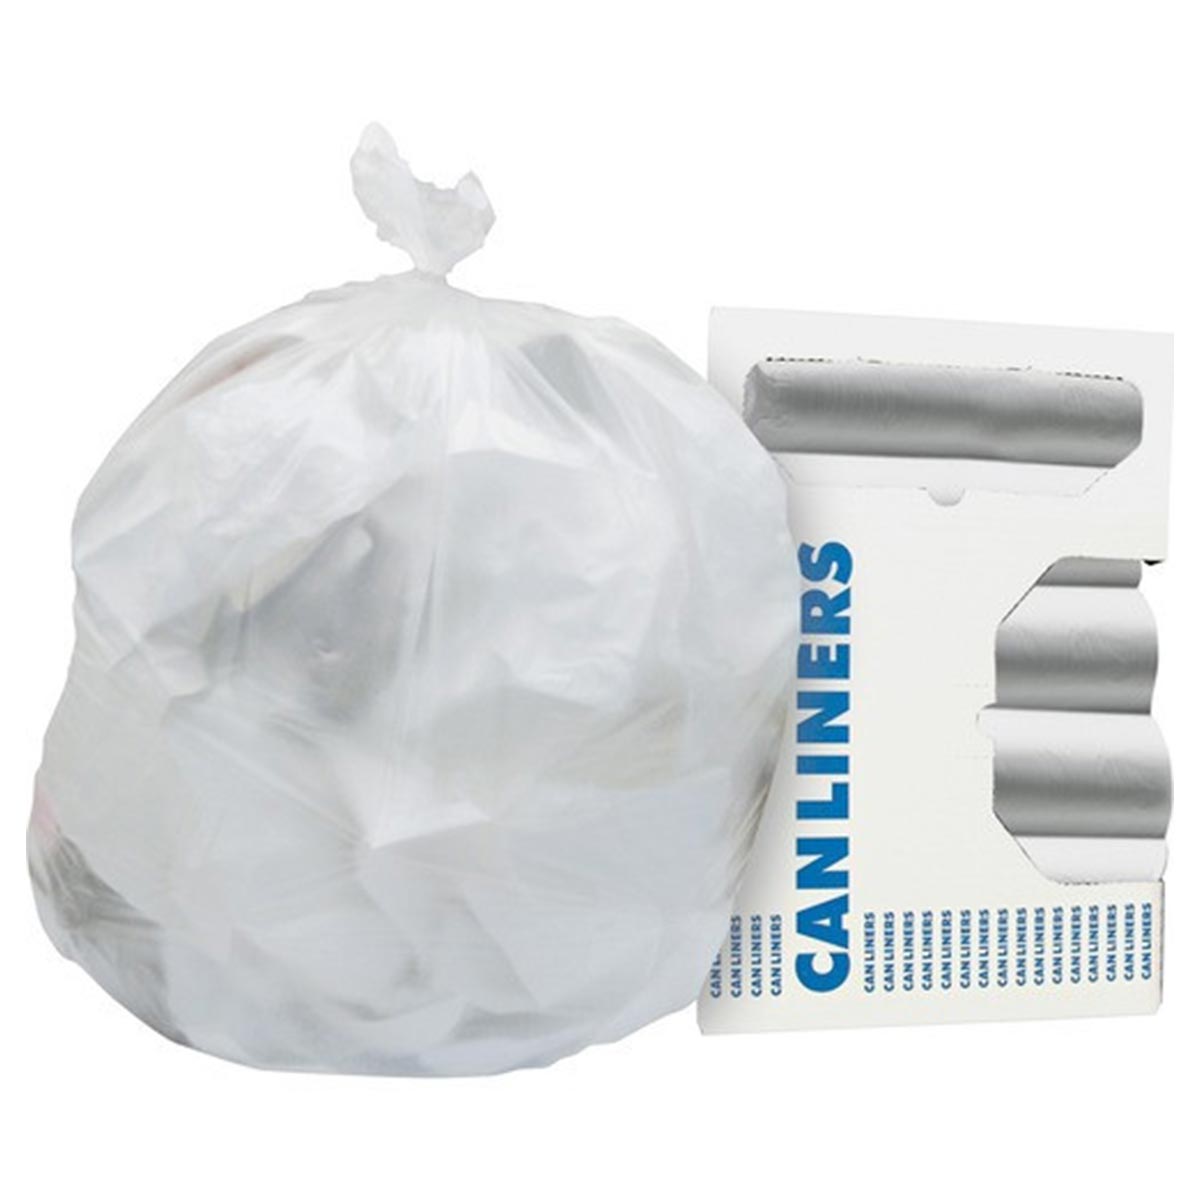 FREE SHIPPING! 13 Gallon Garbage Bags 13 Gallon Trash Bags 13 GAL Can Liners  24 x 33 6 Micron Clear